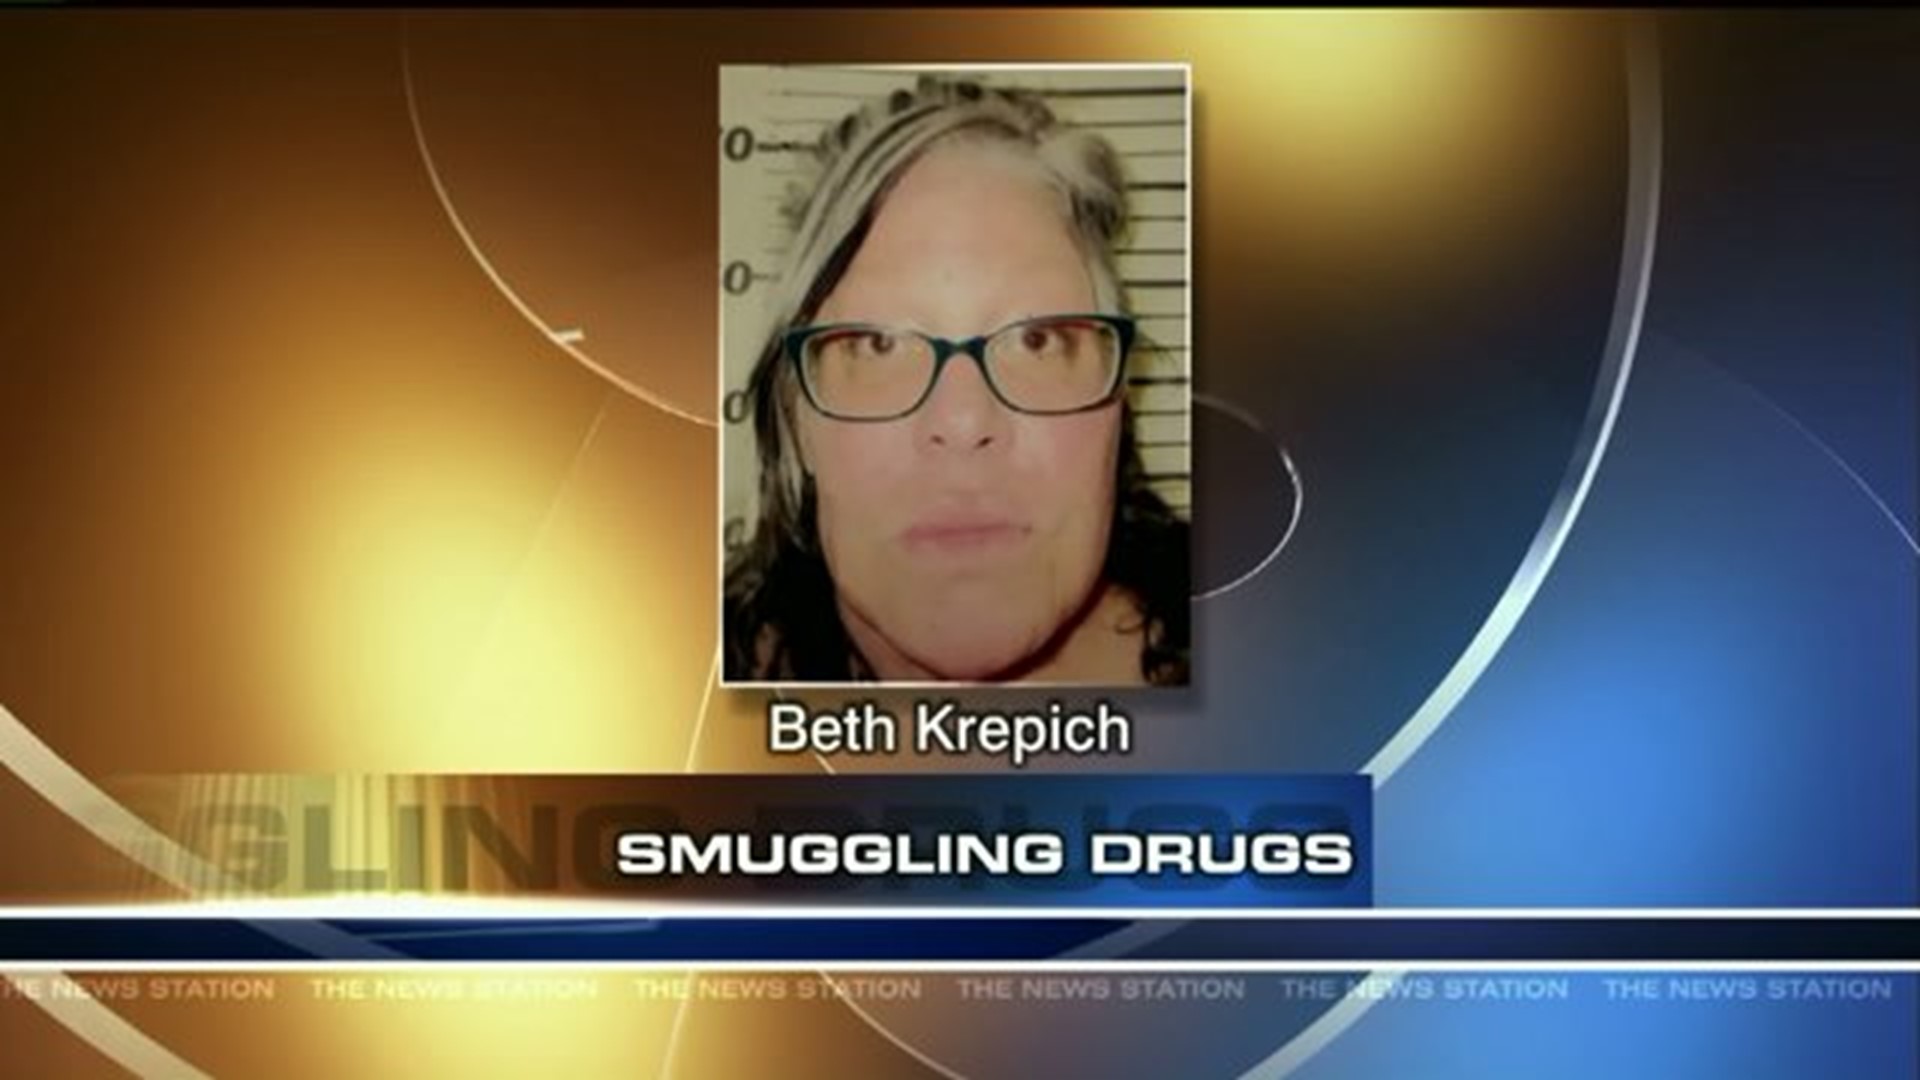 Mother Charged After Smuggling Drugs into Courthouse Bathroom